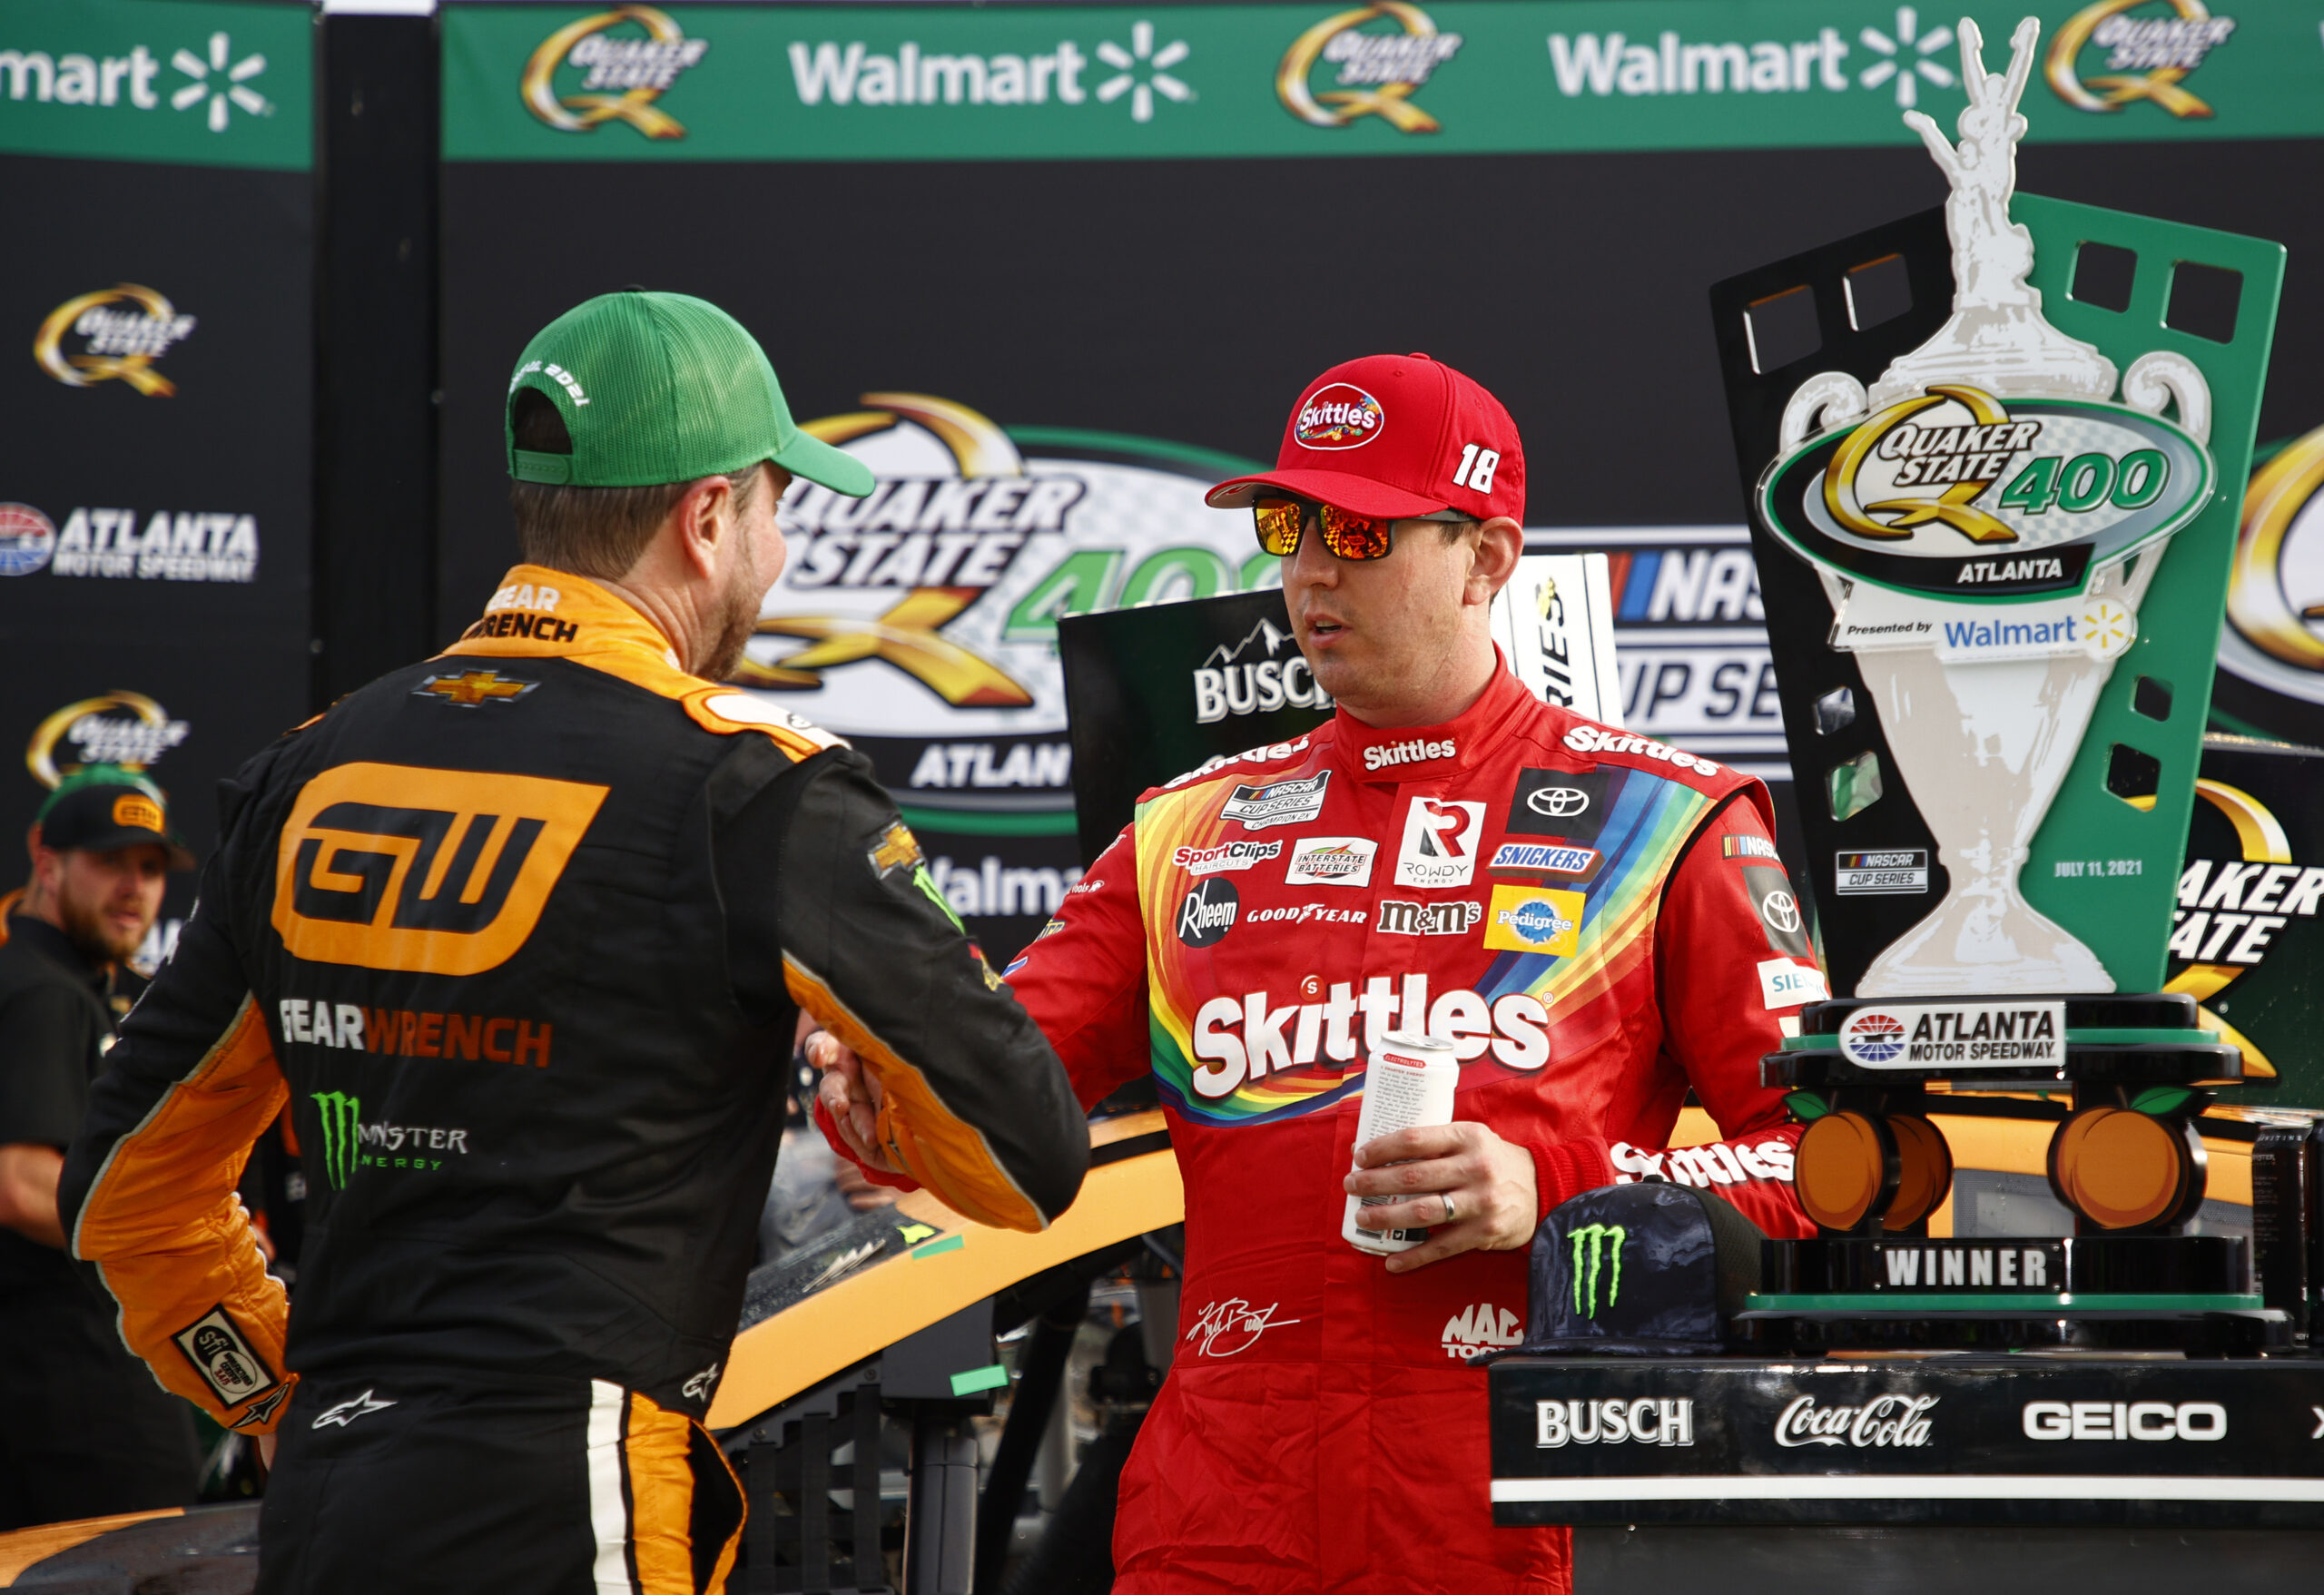 Like the Bee Gees, the Busch brothers win again. (Photo: Jared C. Tilton/Getty Images)